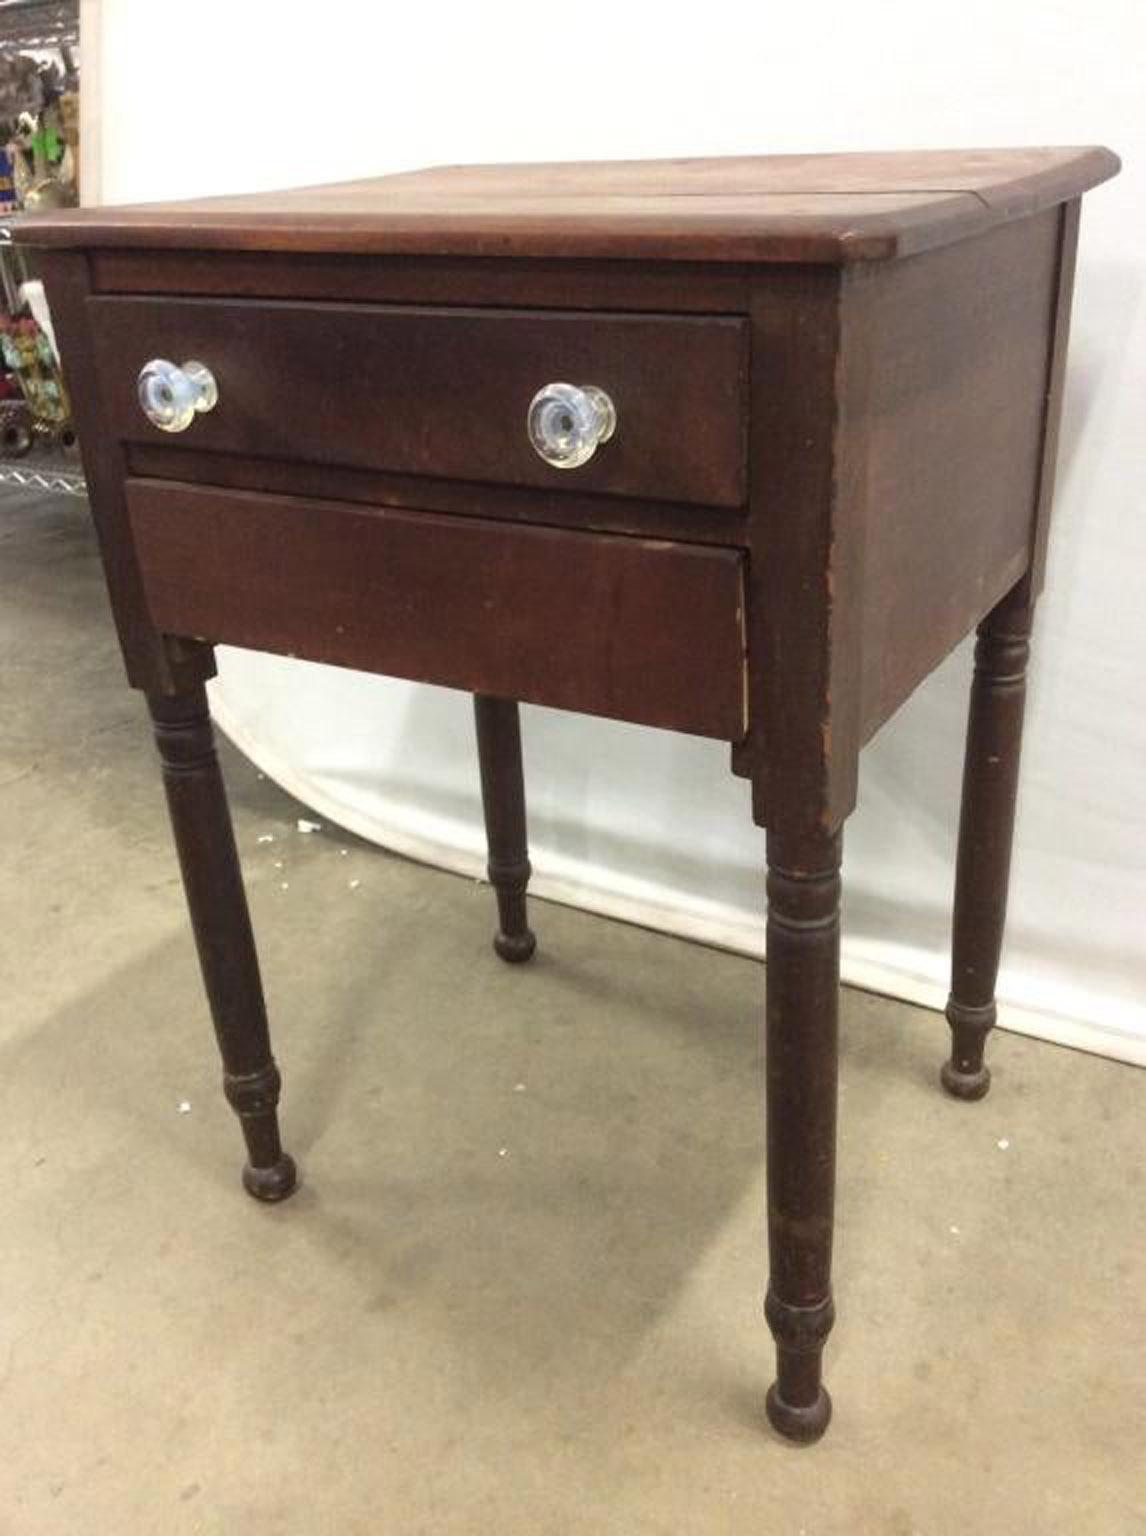 A rustic Sheraton style end table or stand with 2 drawers, and turn legs. Top drawer has 2 handles. Piece contains wear and separation on tabletop. Suitable to use as end table, side table, bedside lamp table.
  